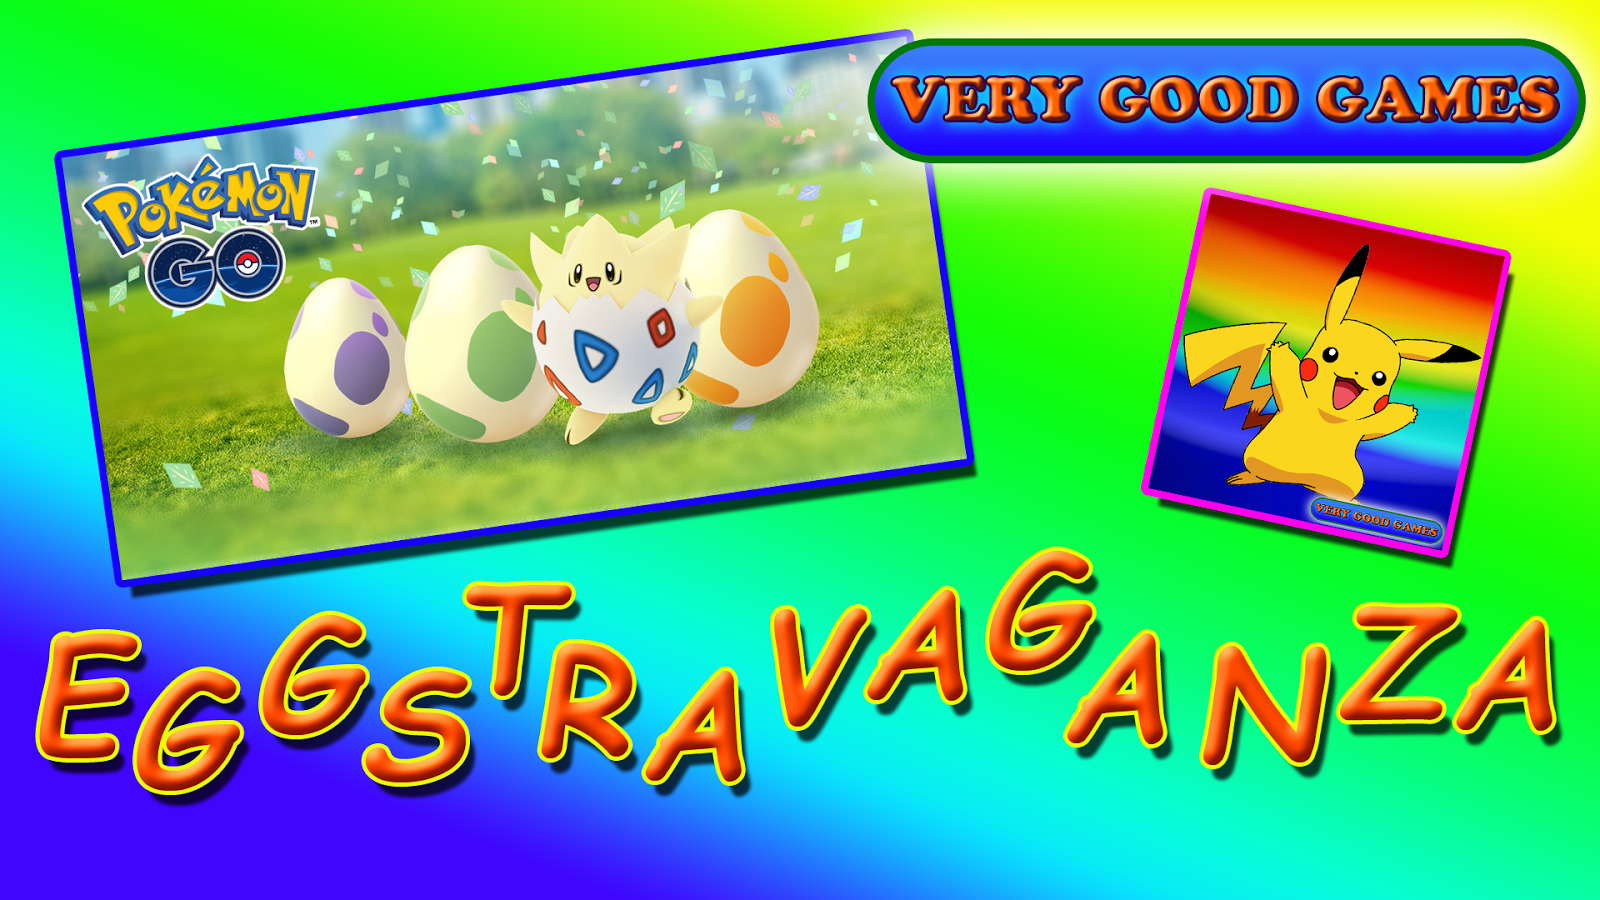 News on Very Good Games about Easter event in the Pokemon Go game